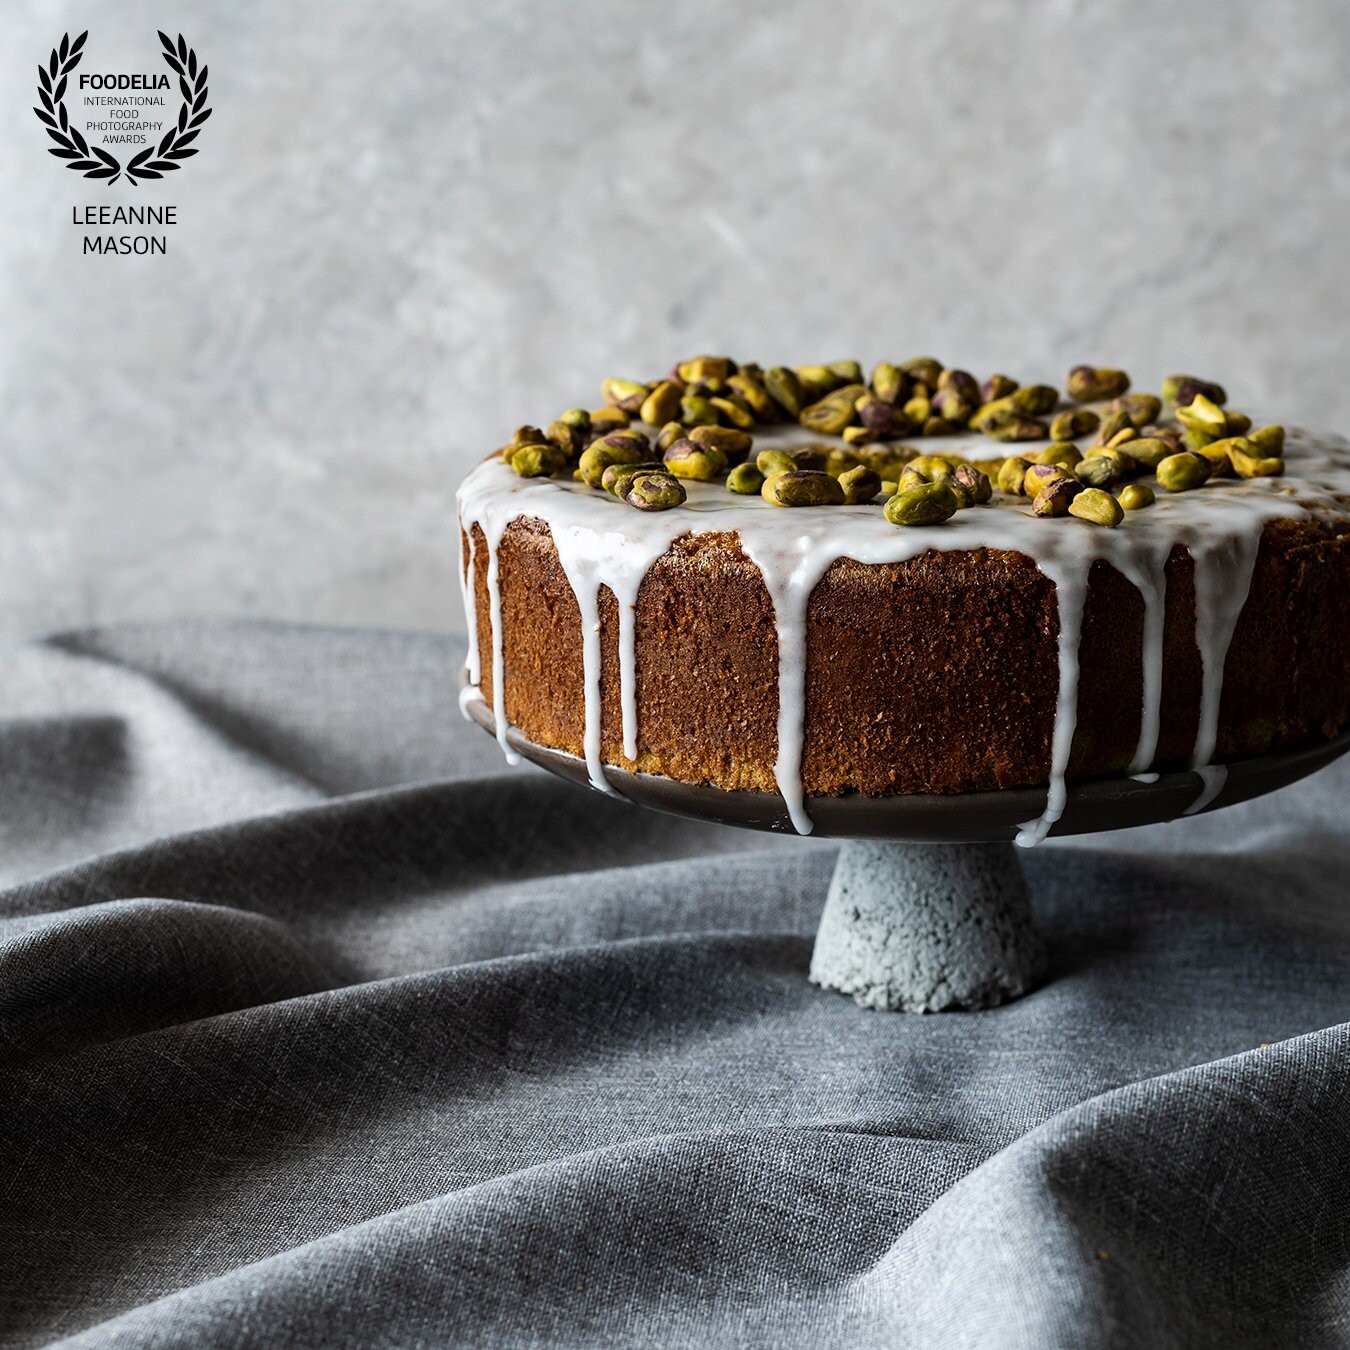 This is a delicious Pandan Cake made in a Chiffon Tin with a simple drip glaze and pistachio topping.  The use of negative space helps draw the viewer to the visual weight of the cake.  The detail of the cake and the fabric base is highlighted by lovely soft natural side light.